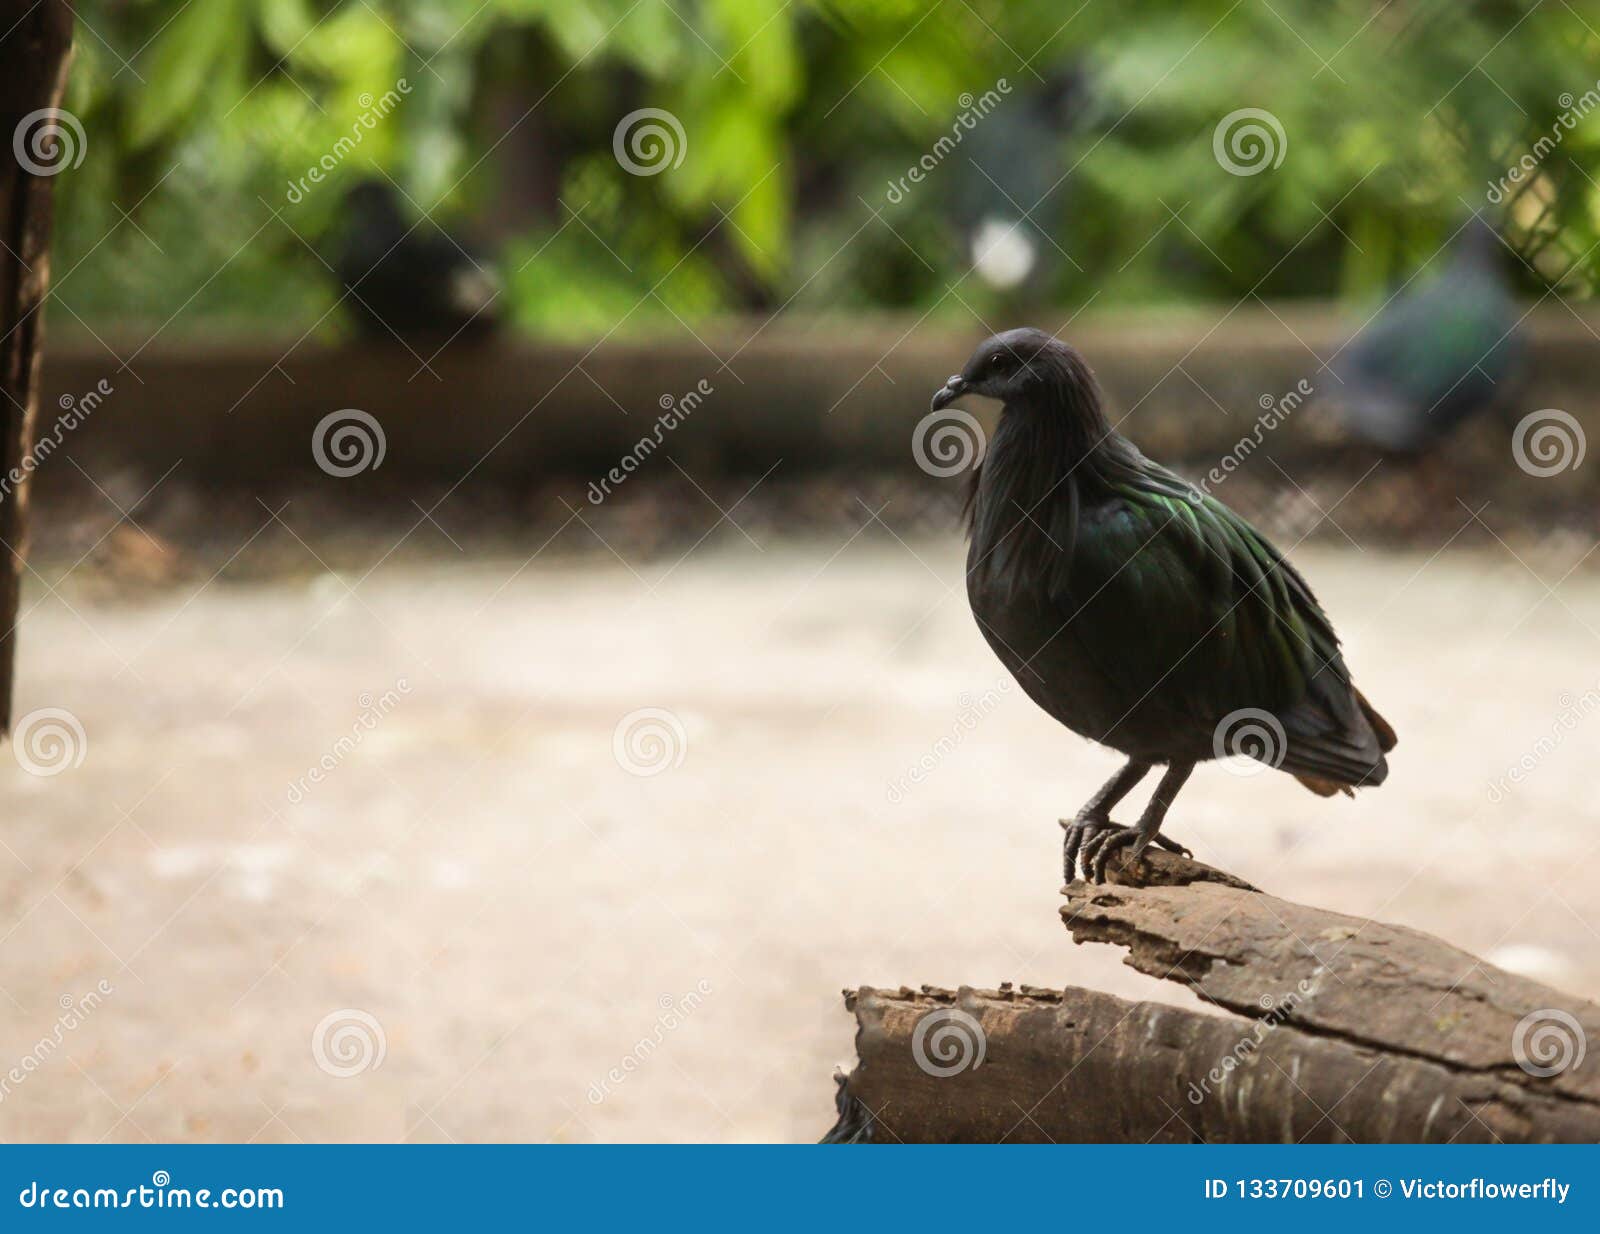 nicobar pigeon nicobar dove, large pigeon found on small islands and coastal regions, the closest living relative of the extinct